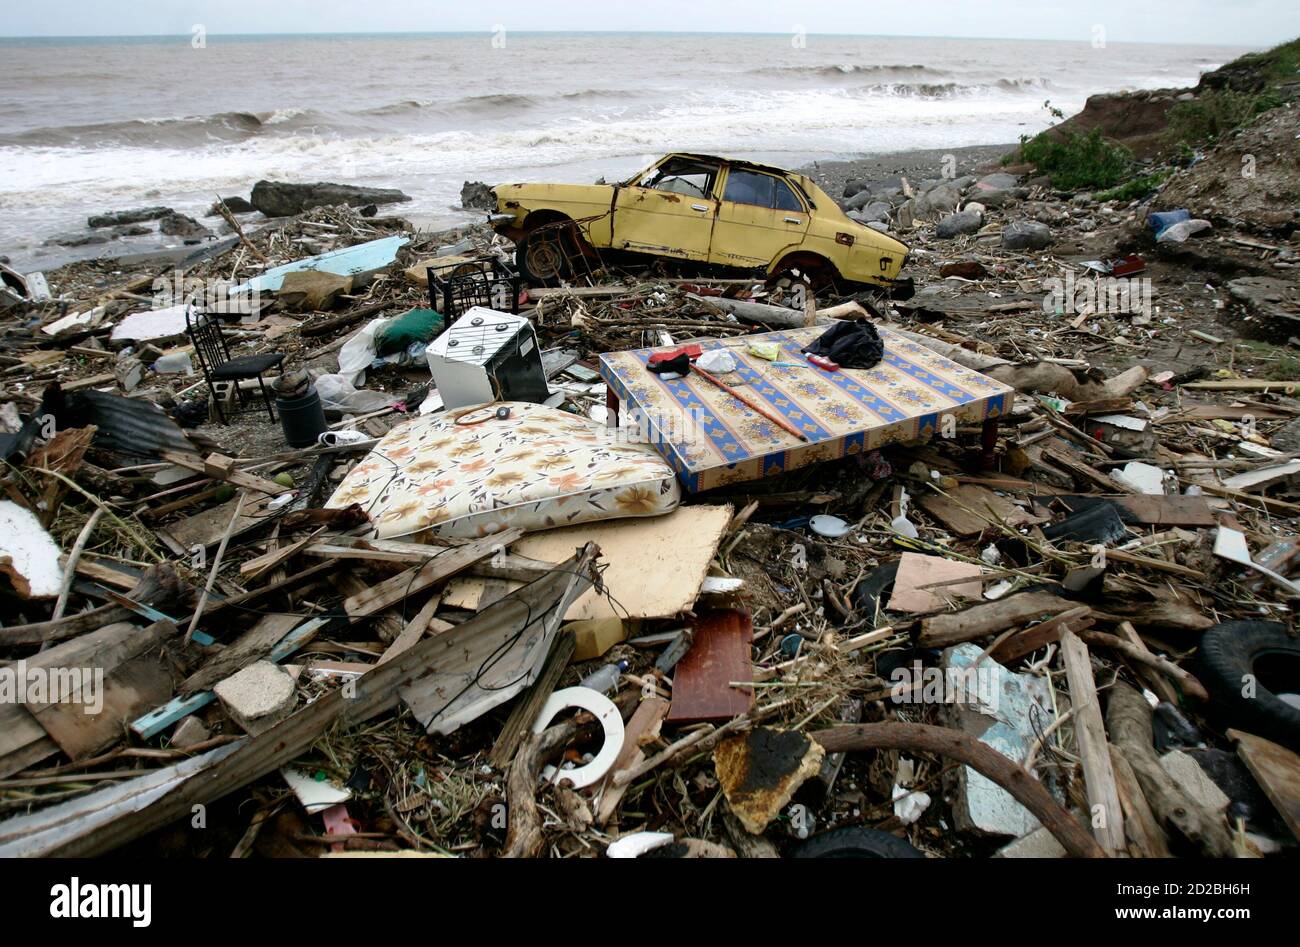 Damage is seen after Hurricane Dean passed at Bull Bay area in Kingston,  Jamaica August 20, 2007. A strengthening Hurricane Dean took aim at  Mexico's Yucatan on Monday after battering Jamaica's southern